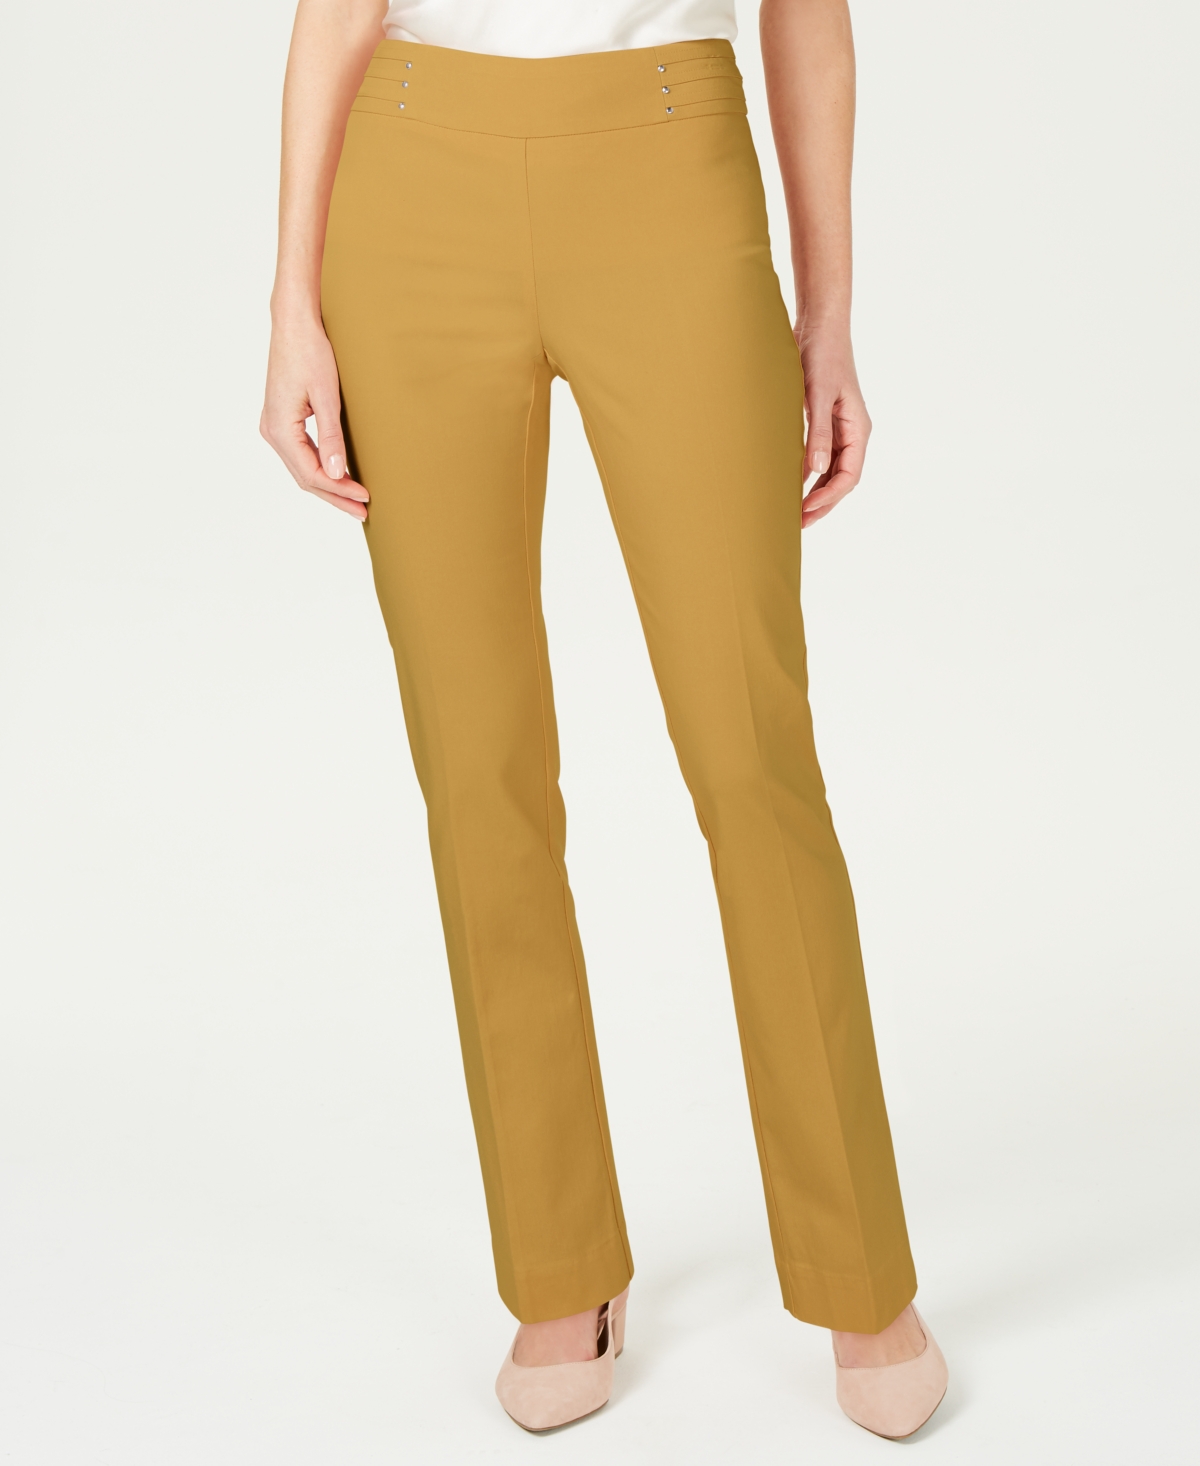 Jm Collection Studded Pull-on Tummy Control Pants, Regular And Short Lengths,  Created For Macy's In Saffron Gold